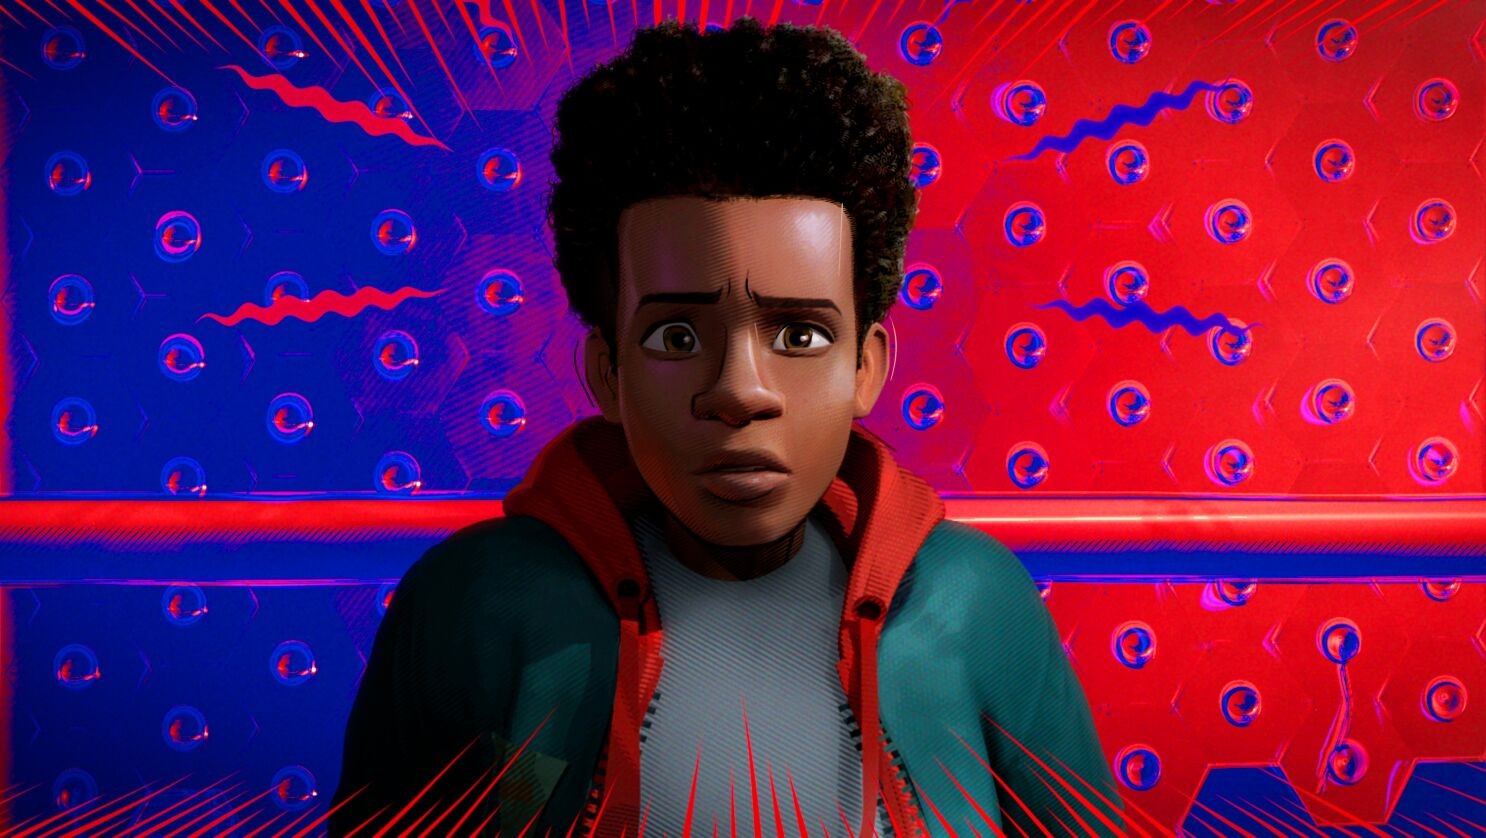 Miles Morales, voiced by Shameik Moore, in Spider-Man: Into the Spider-Verse